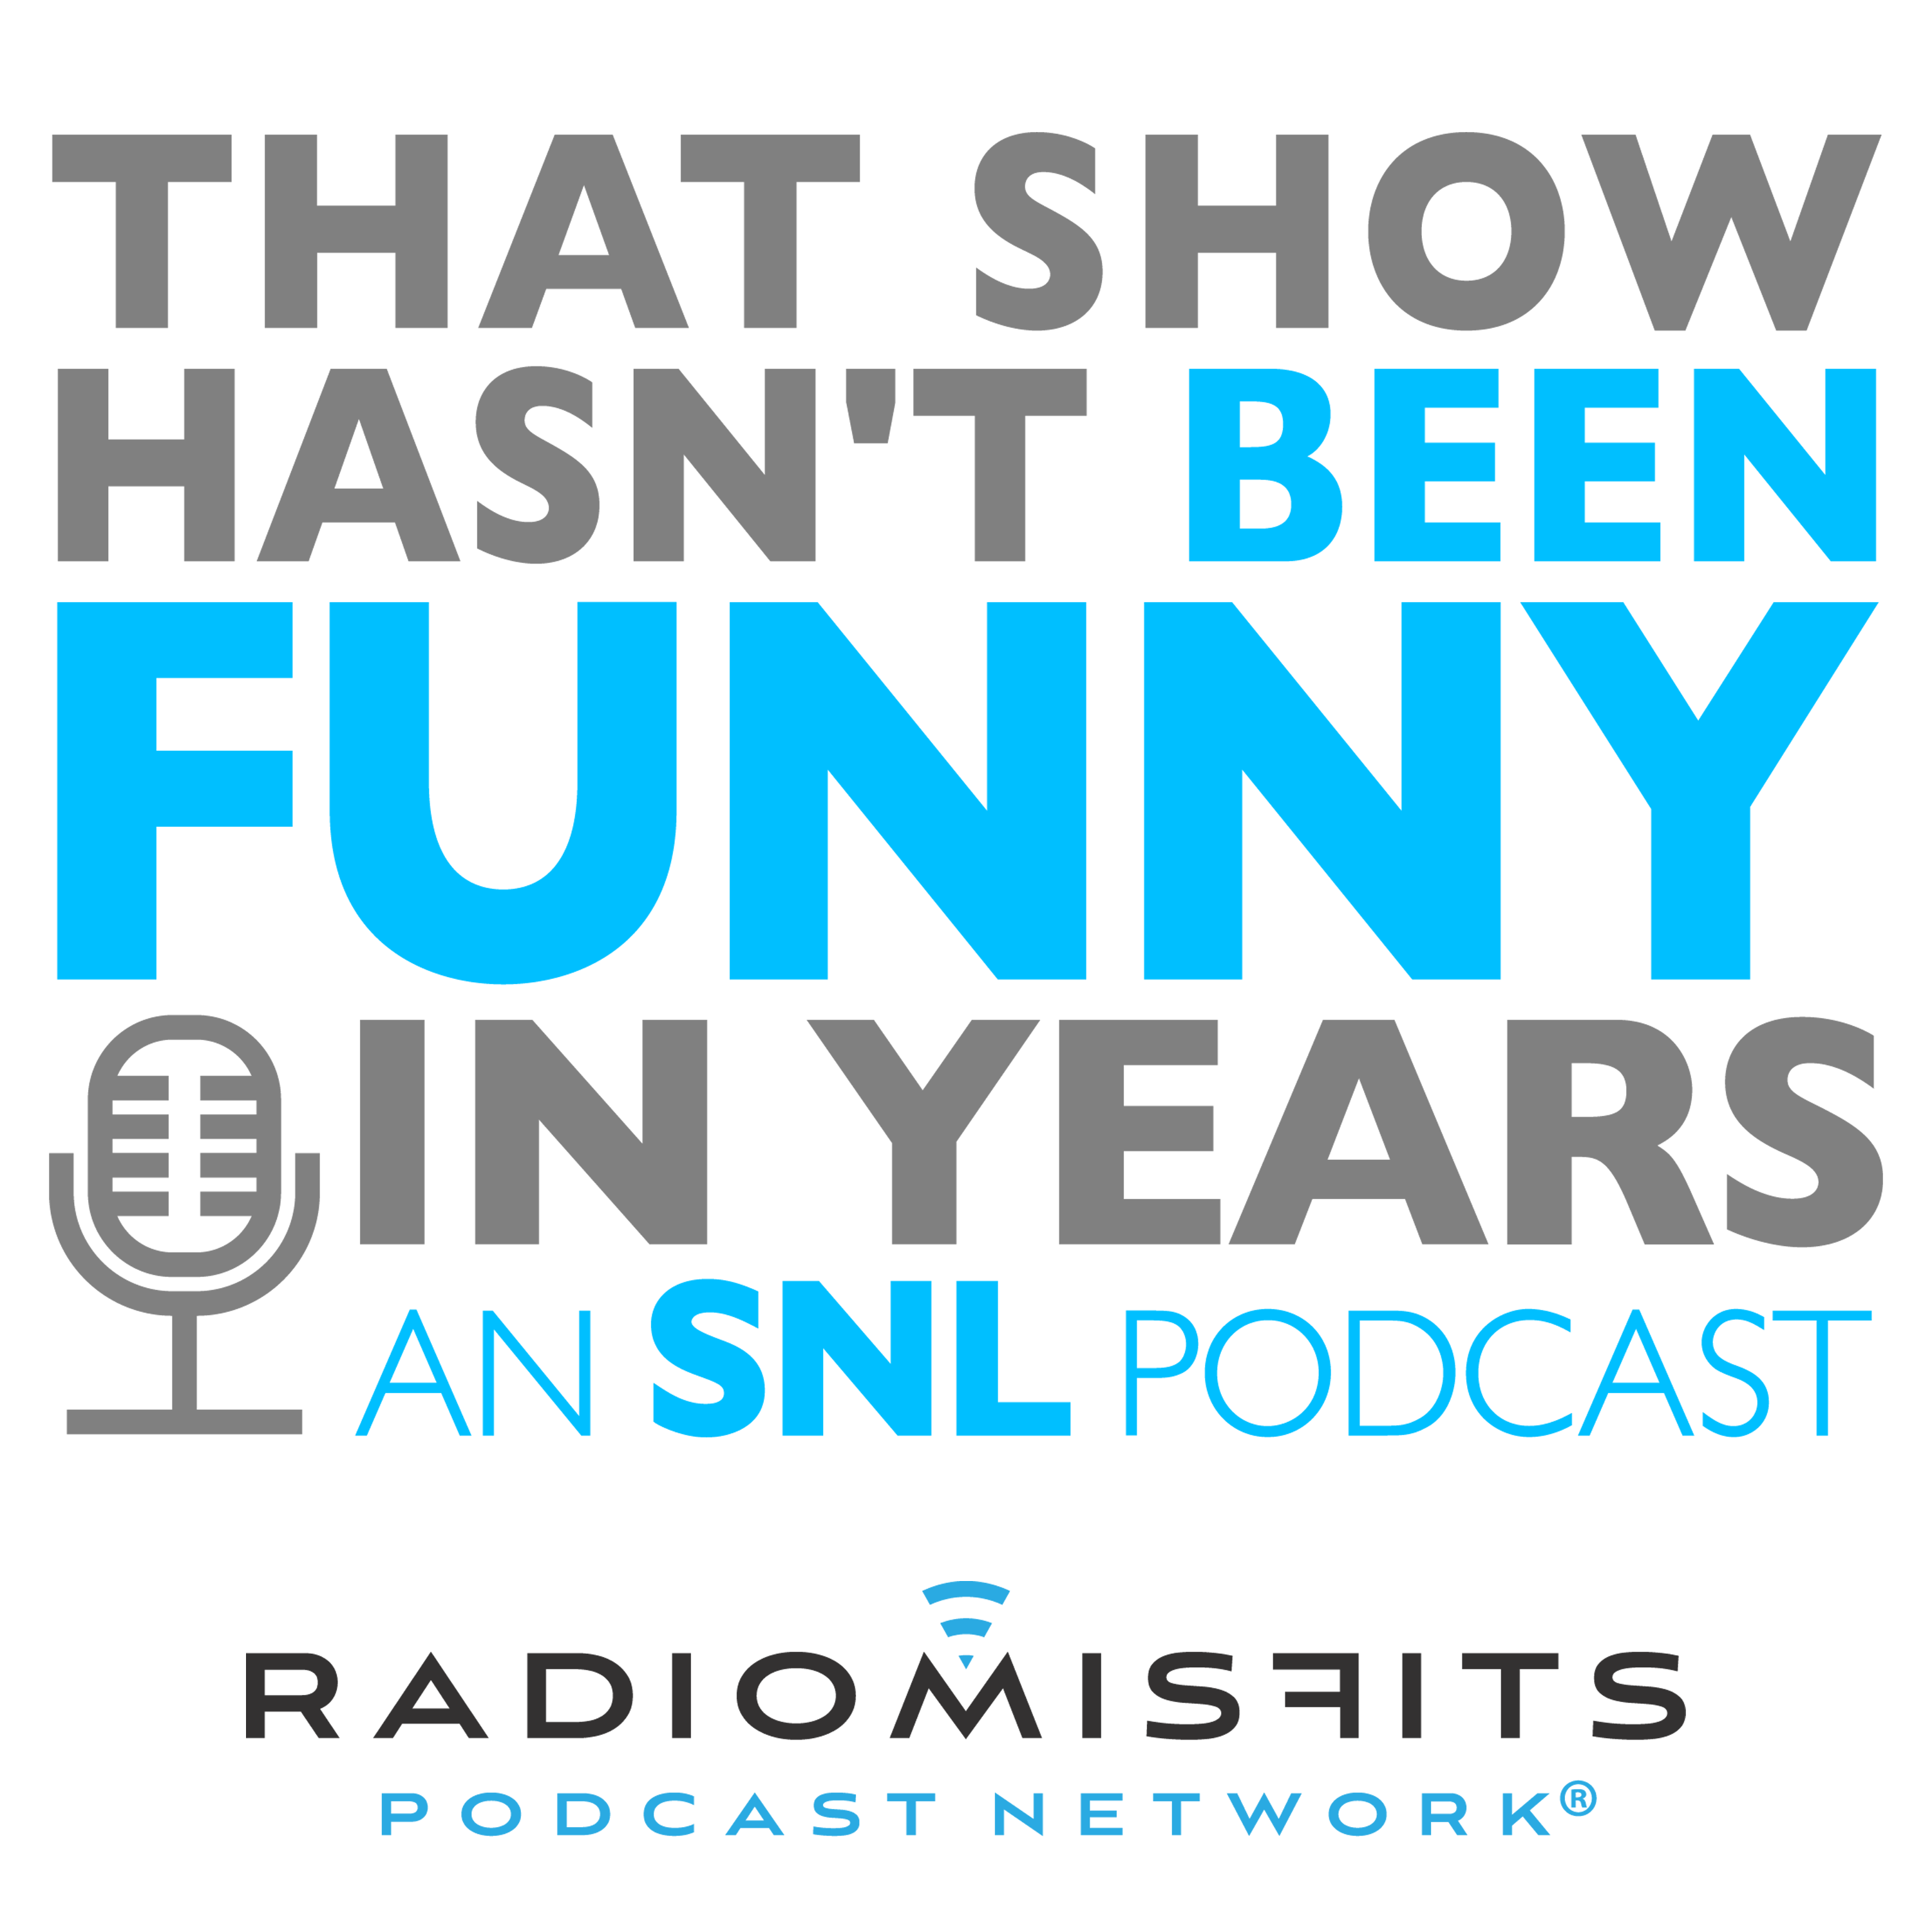 That Show Hasn't Been Funny In Years: an SNL podcast on Radio Misfits